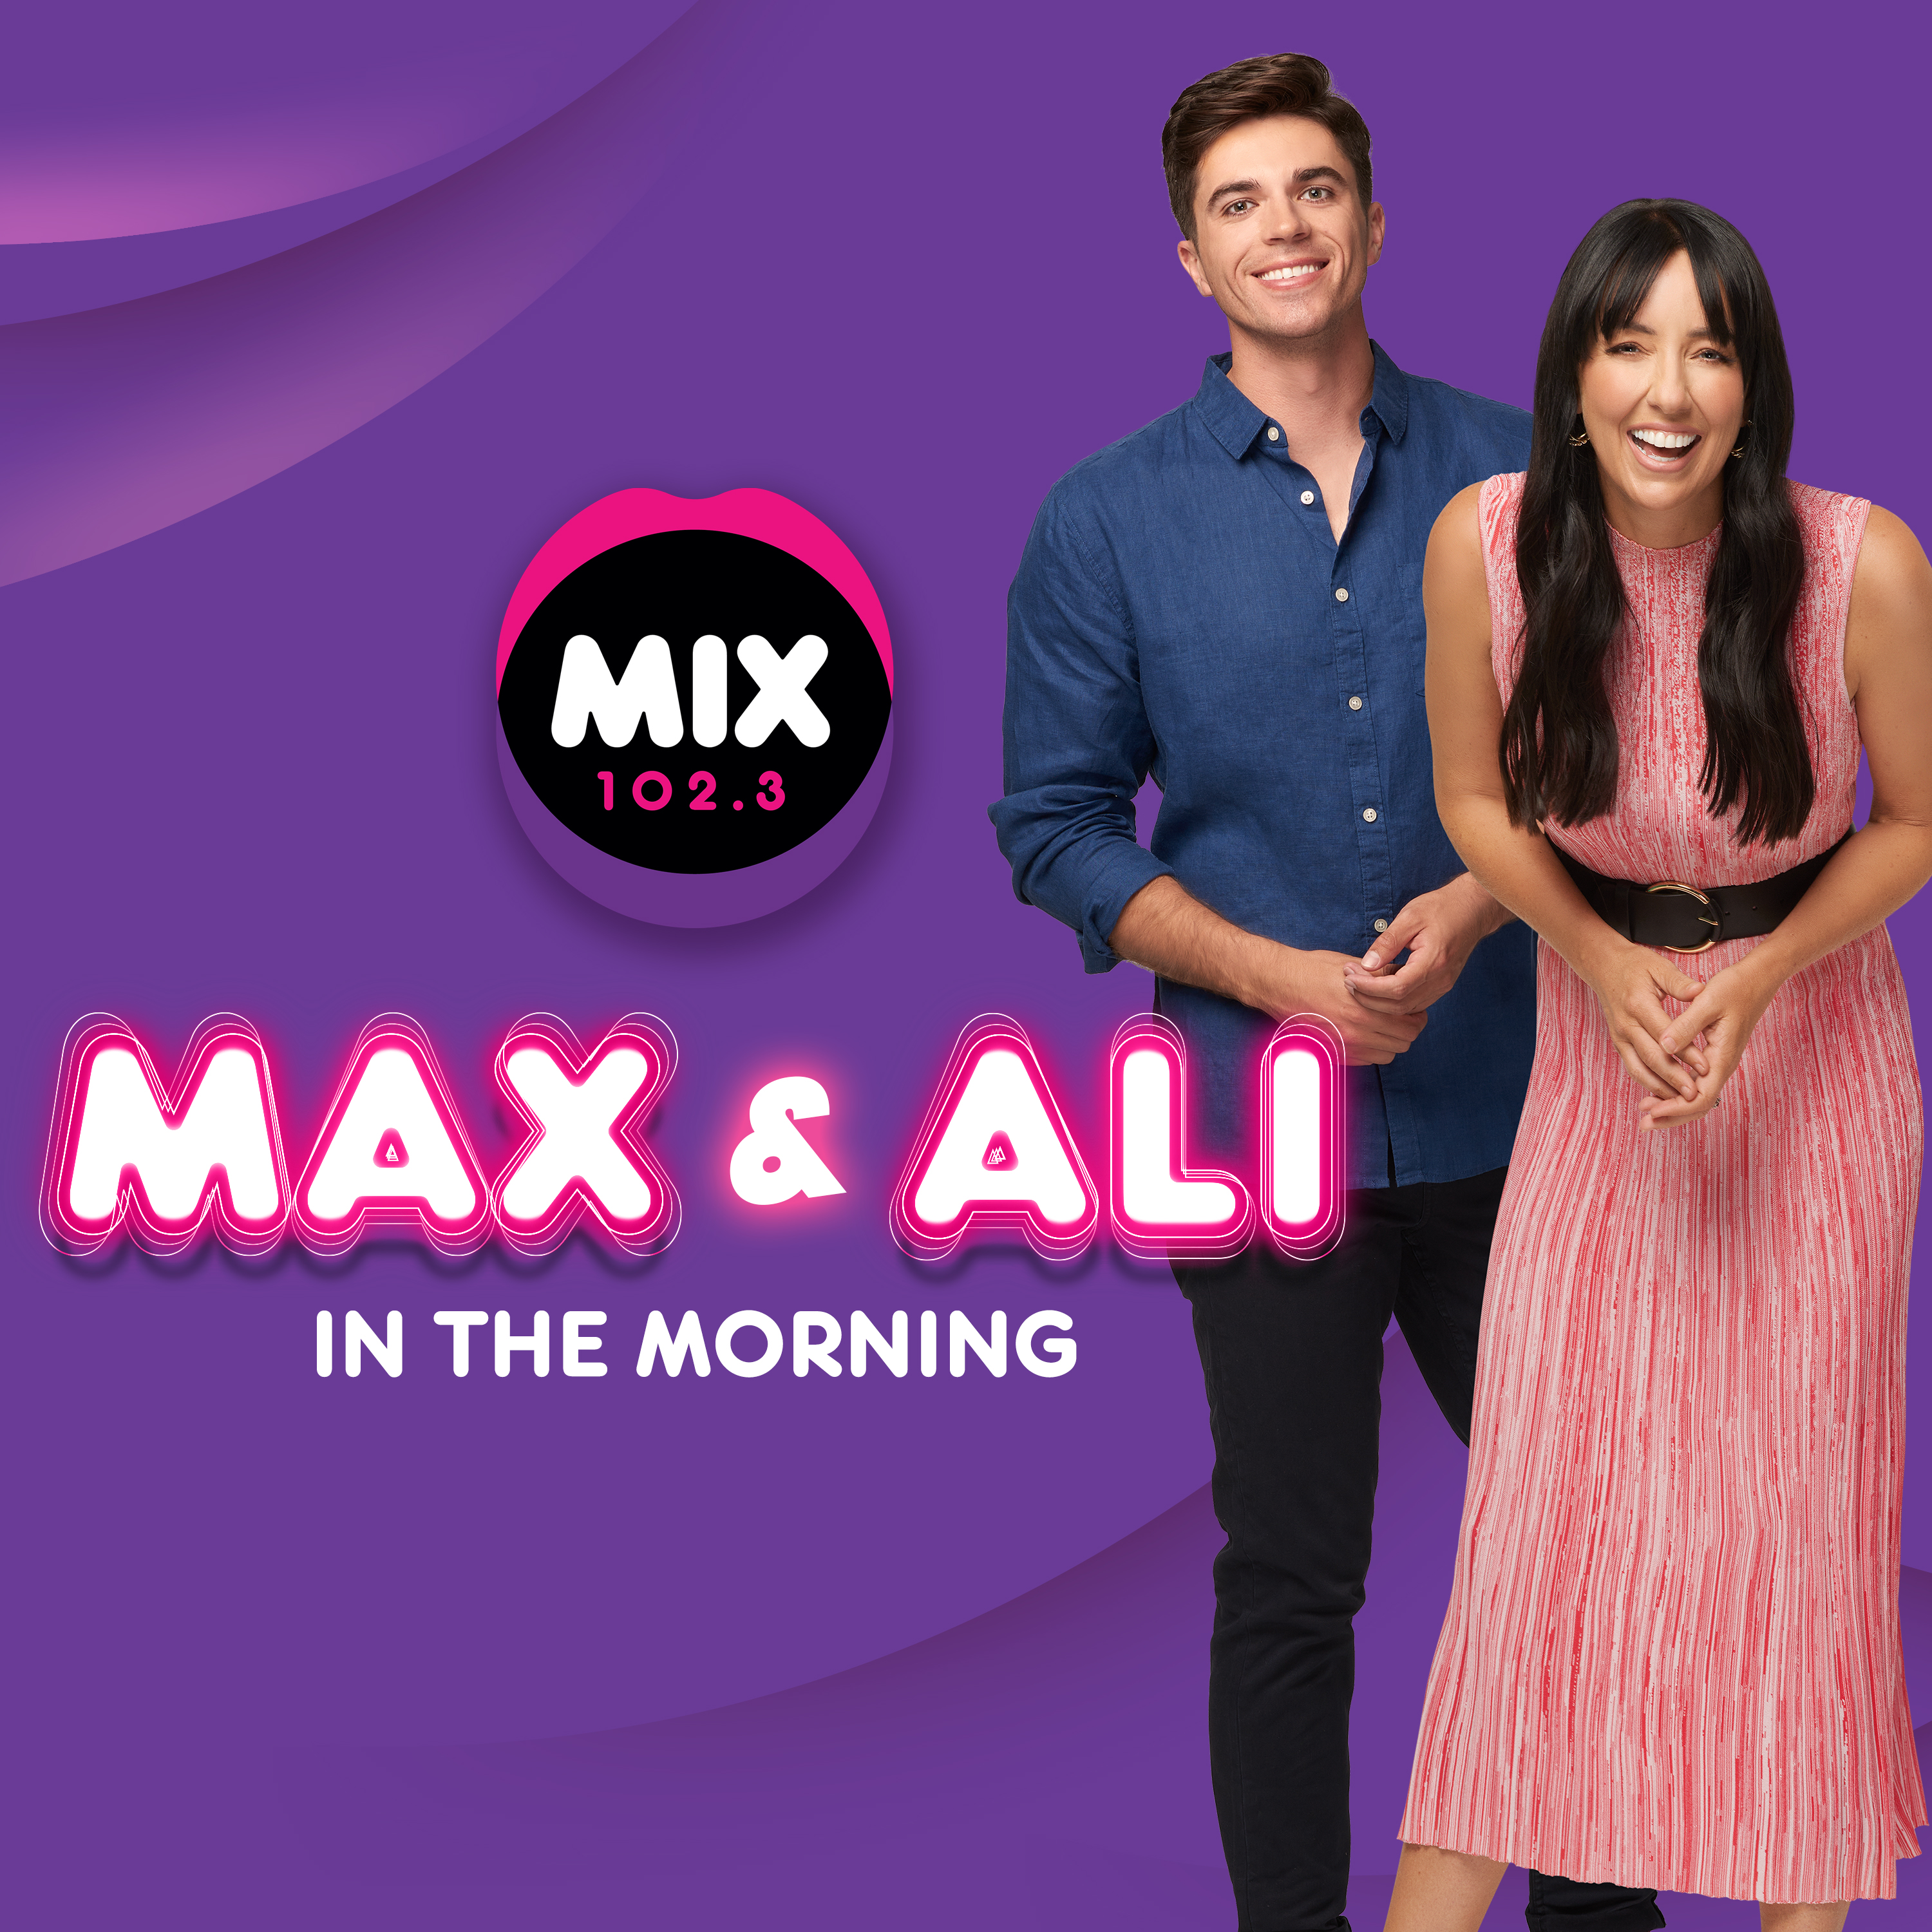 Max Responds To Being Listed As Part Of An Adelaide "It" Couple